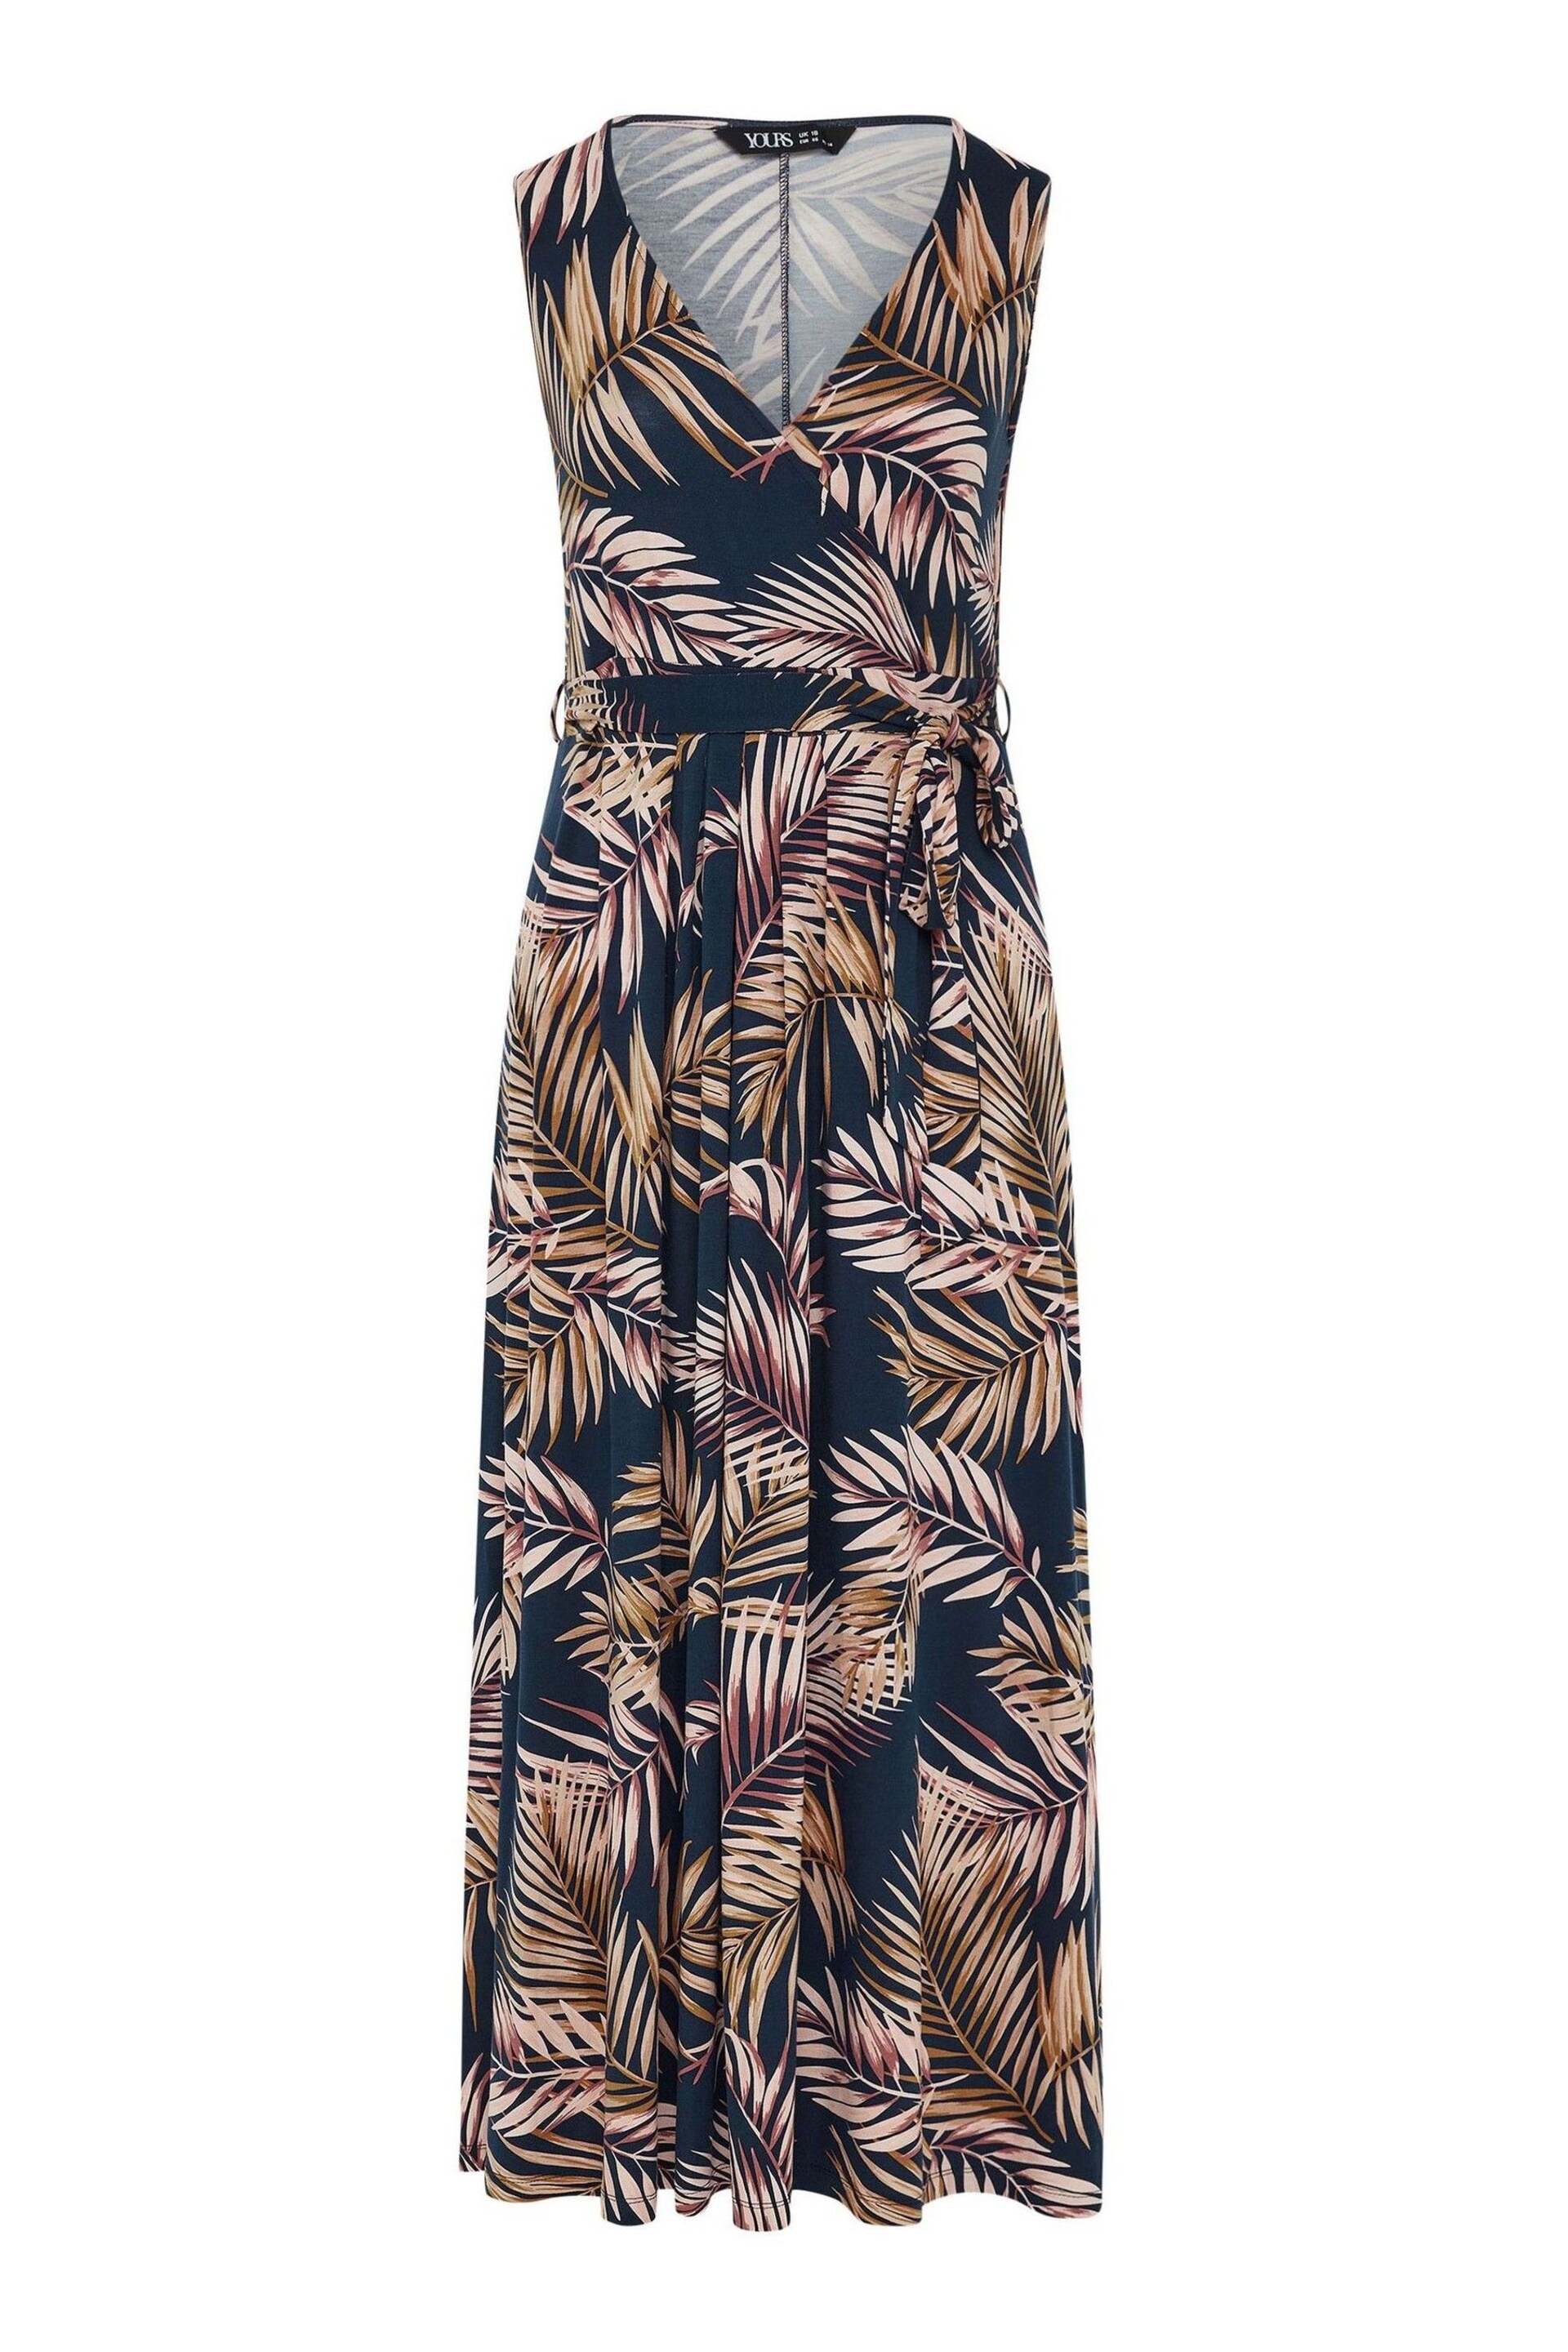 Yours Curve Navy Blue Leaf Print Maxi Wrap Dress - Image 5 of 5